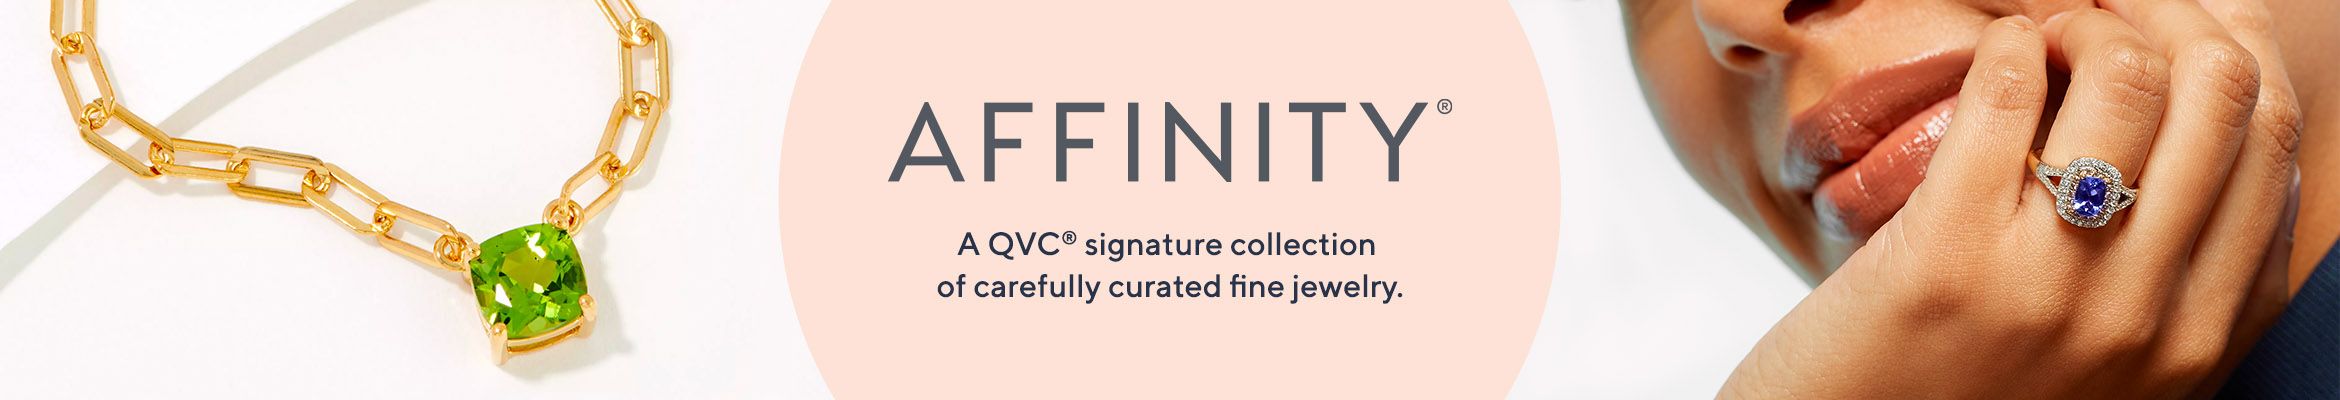 Affinity® - A QVC® signature collection of carefully curated fine jewelry.